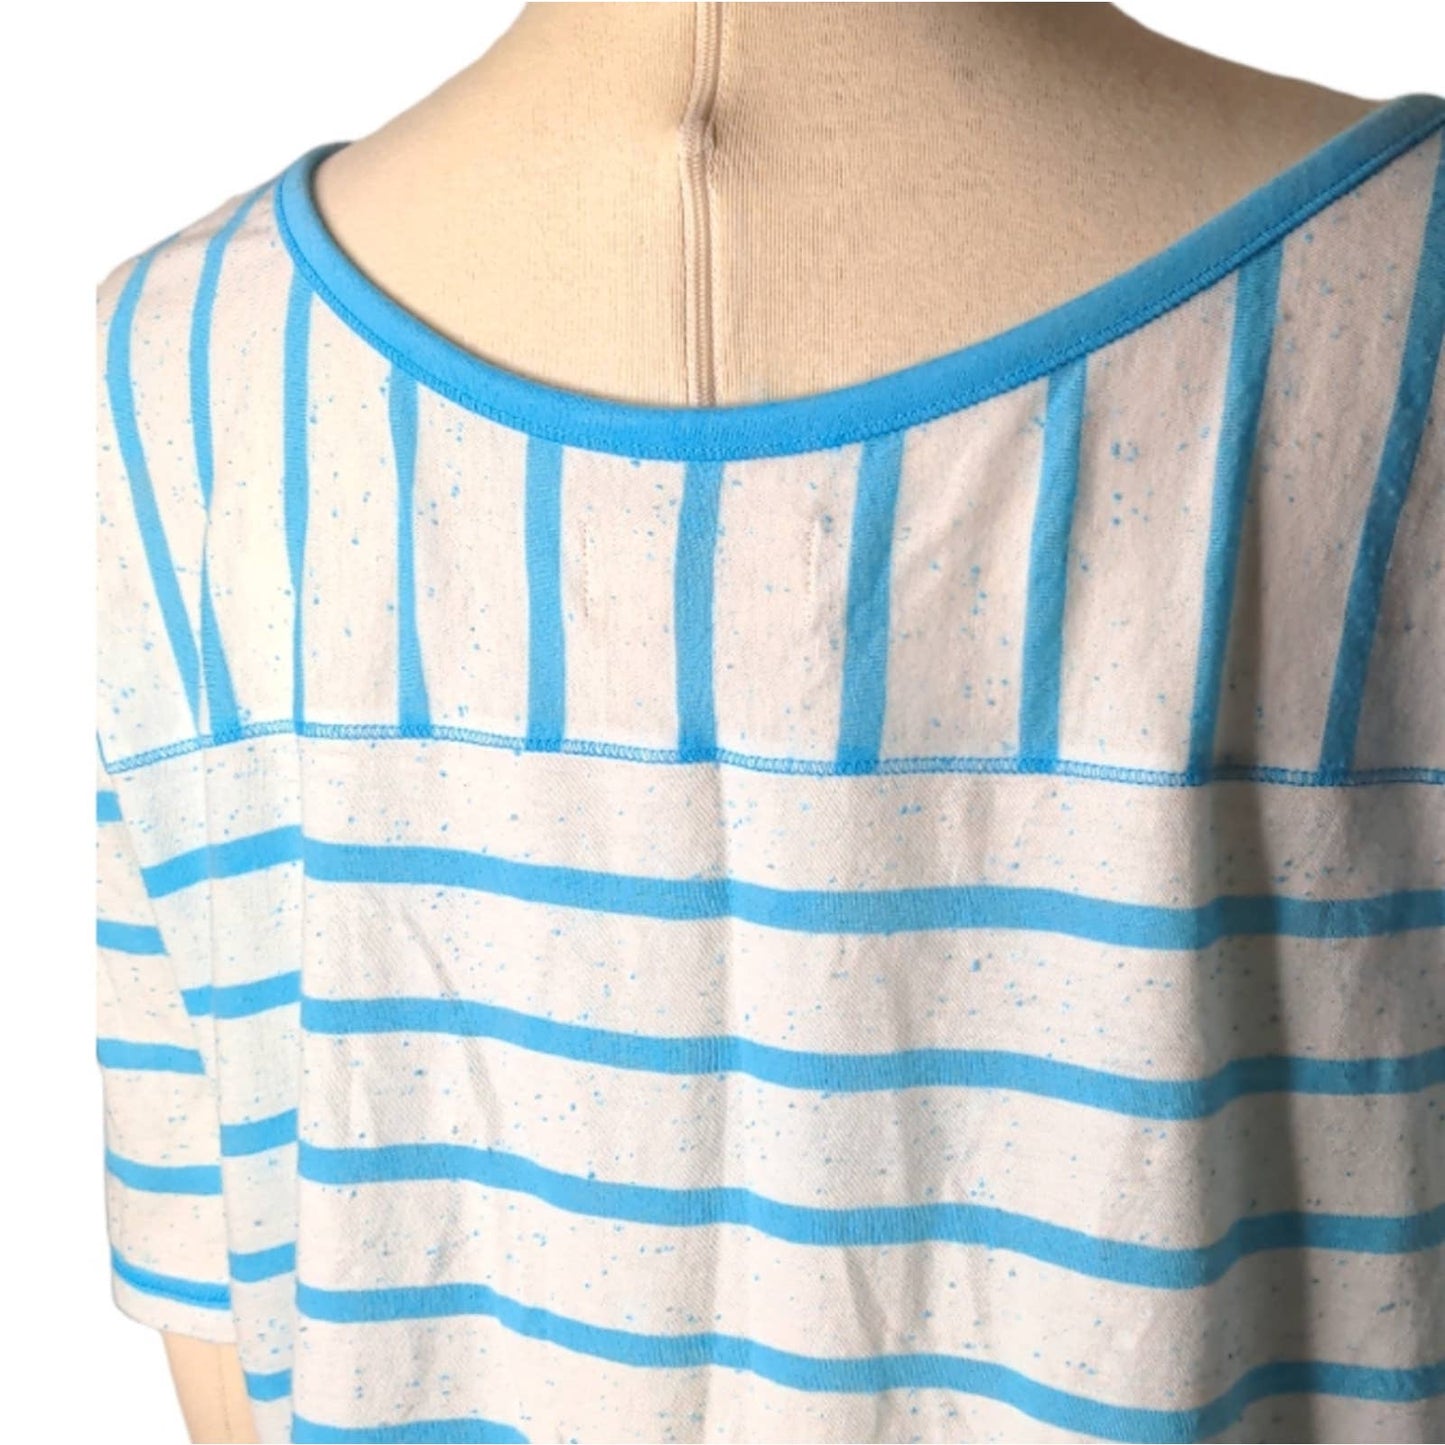 HOLLISTER White Teal Burnout Striped Tee Large NEW